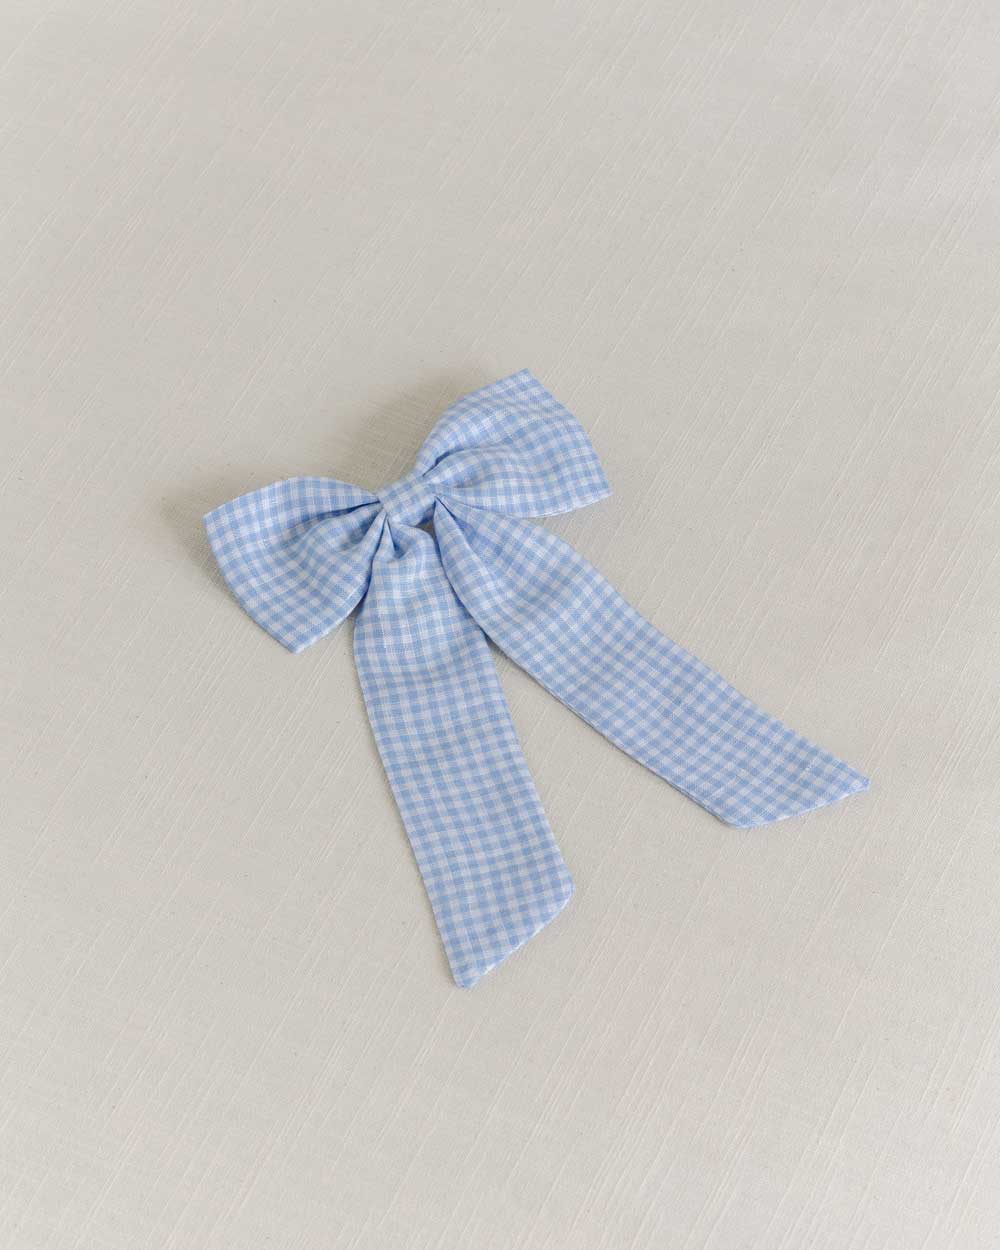 THE BLUE GINGHAM CLASSIC BOW